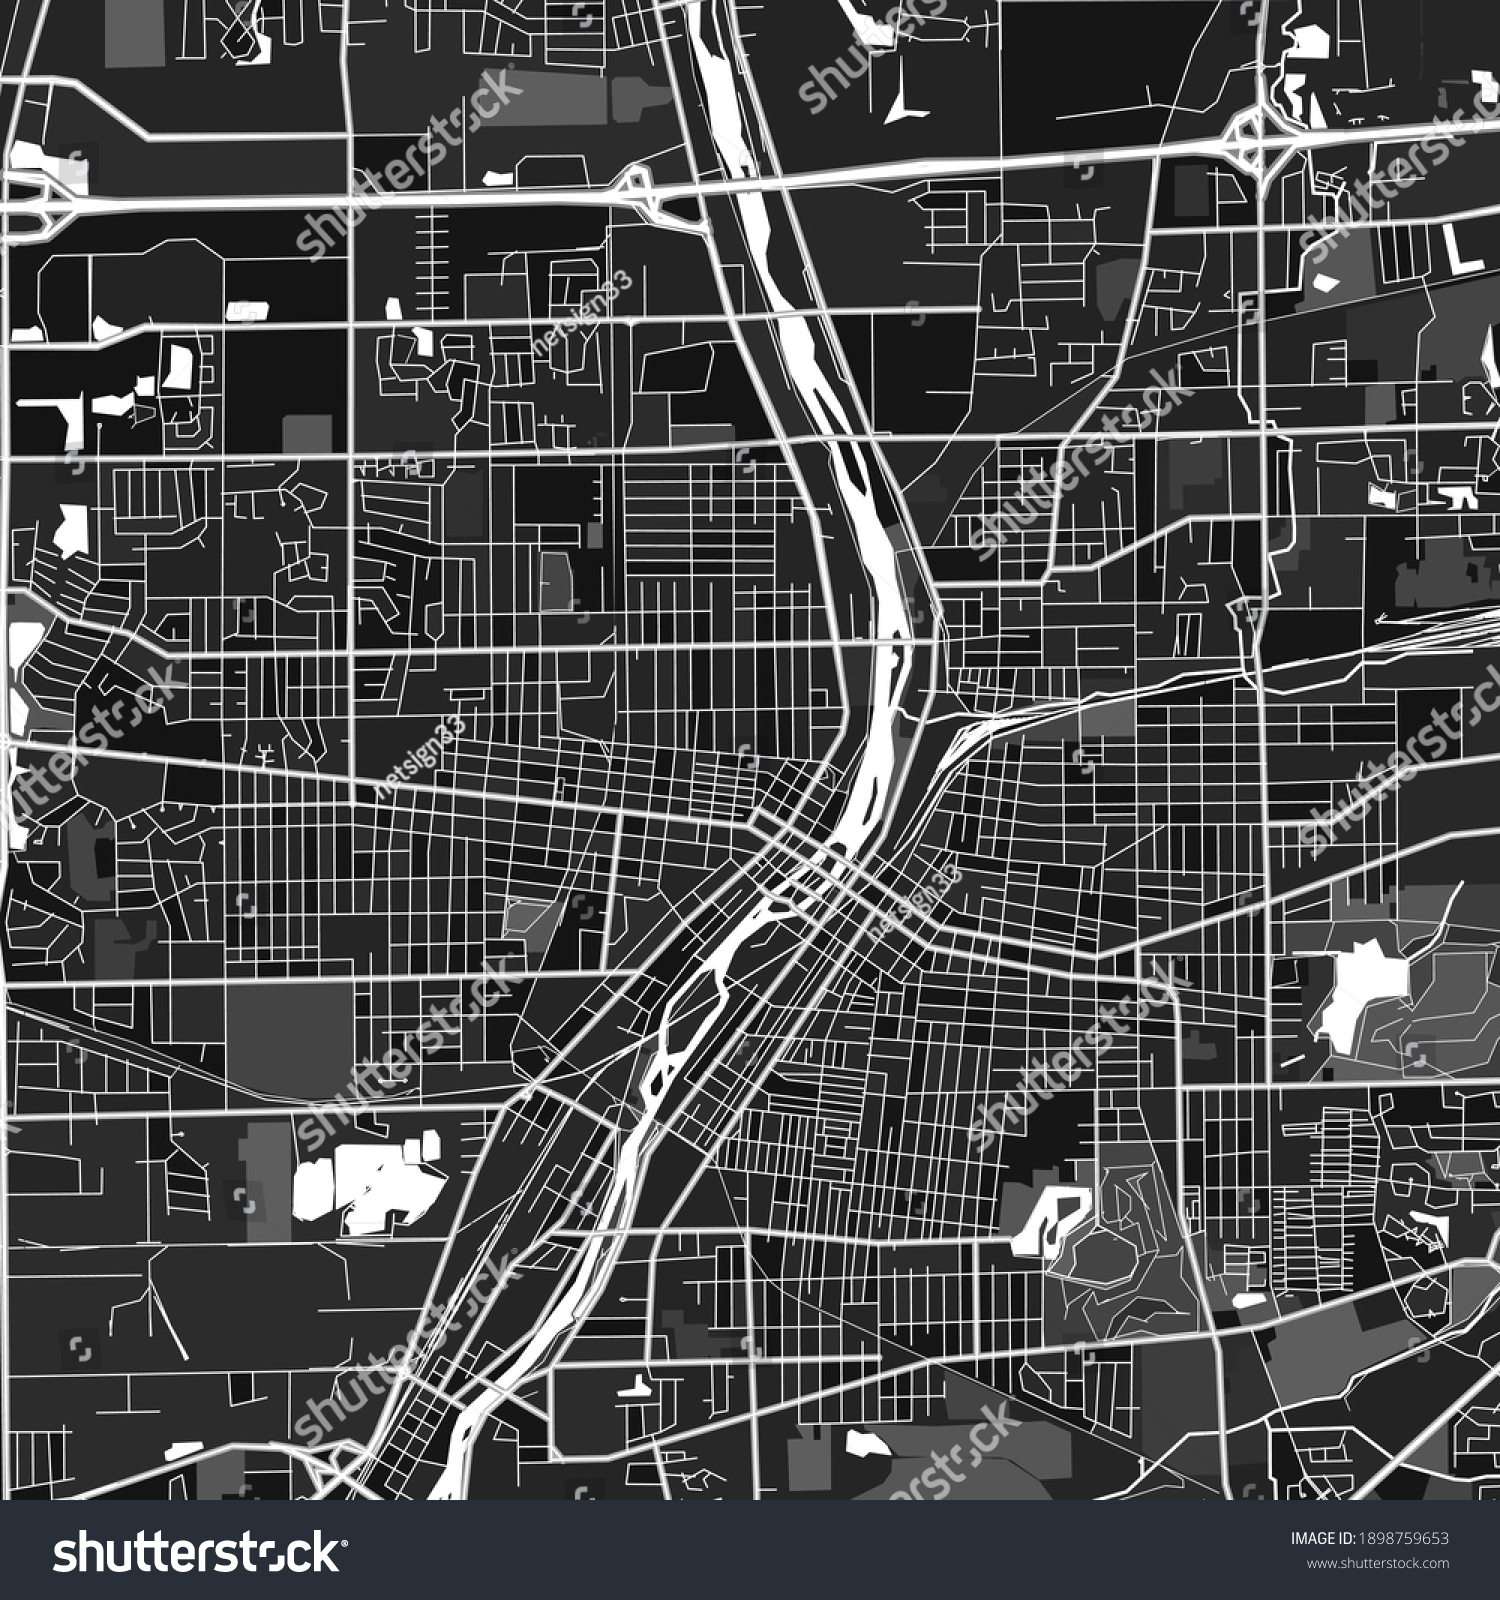 SVG of Dark vector art map of Aurora, Illinois, UnitedStates with fine gray gradations for urban and rural areas. The different shades of gray in the Aurora  map do not follow any particular pattern. svg